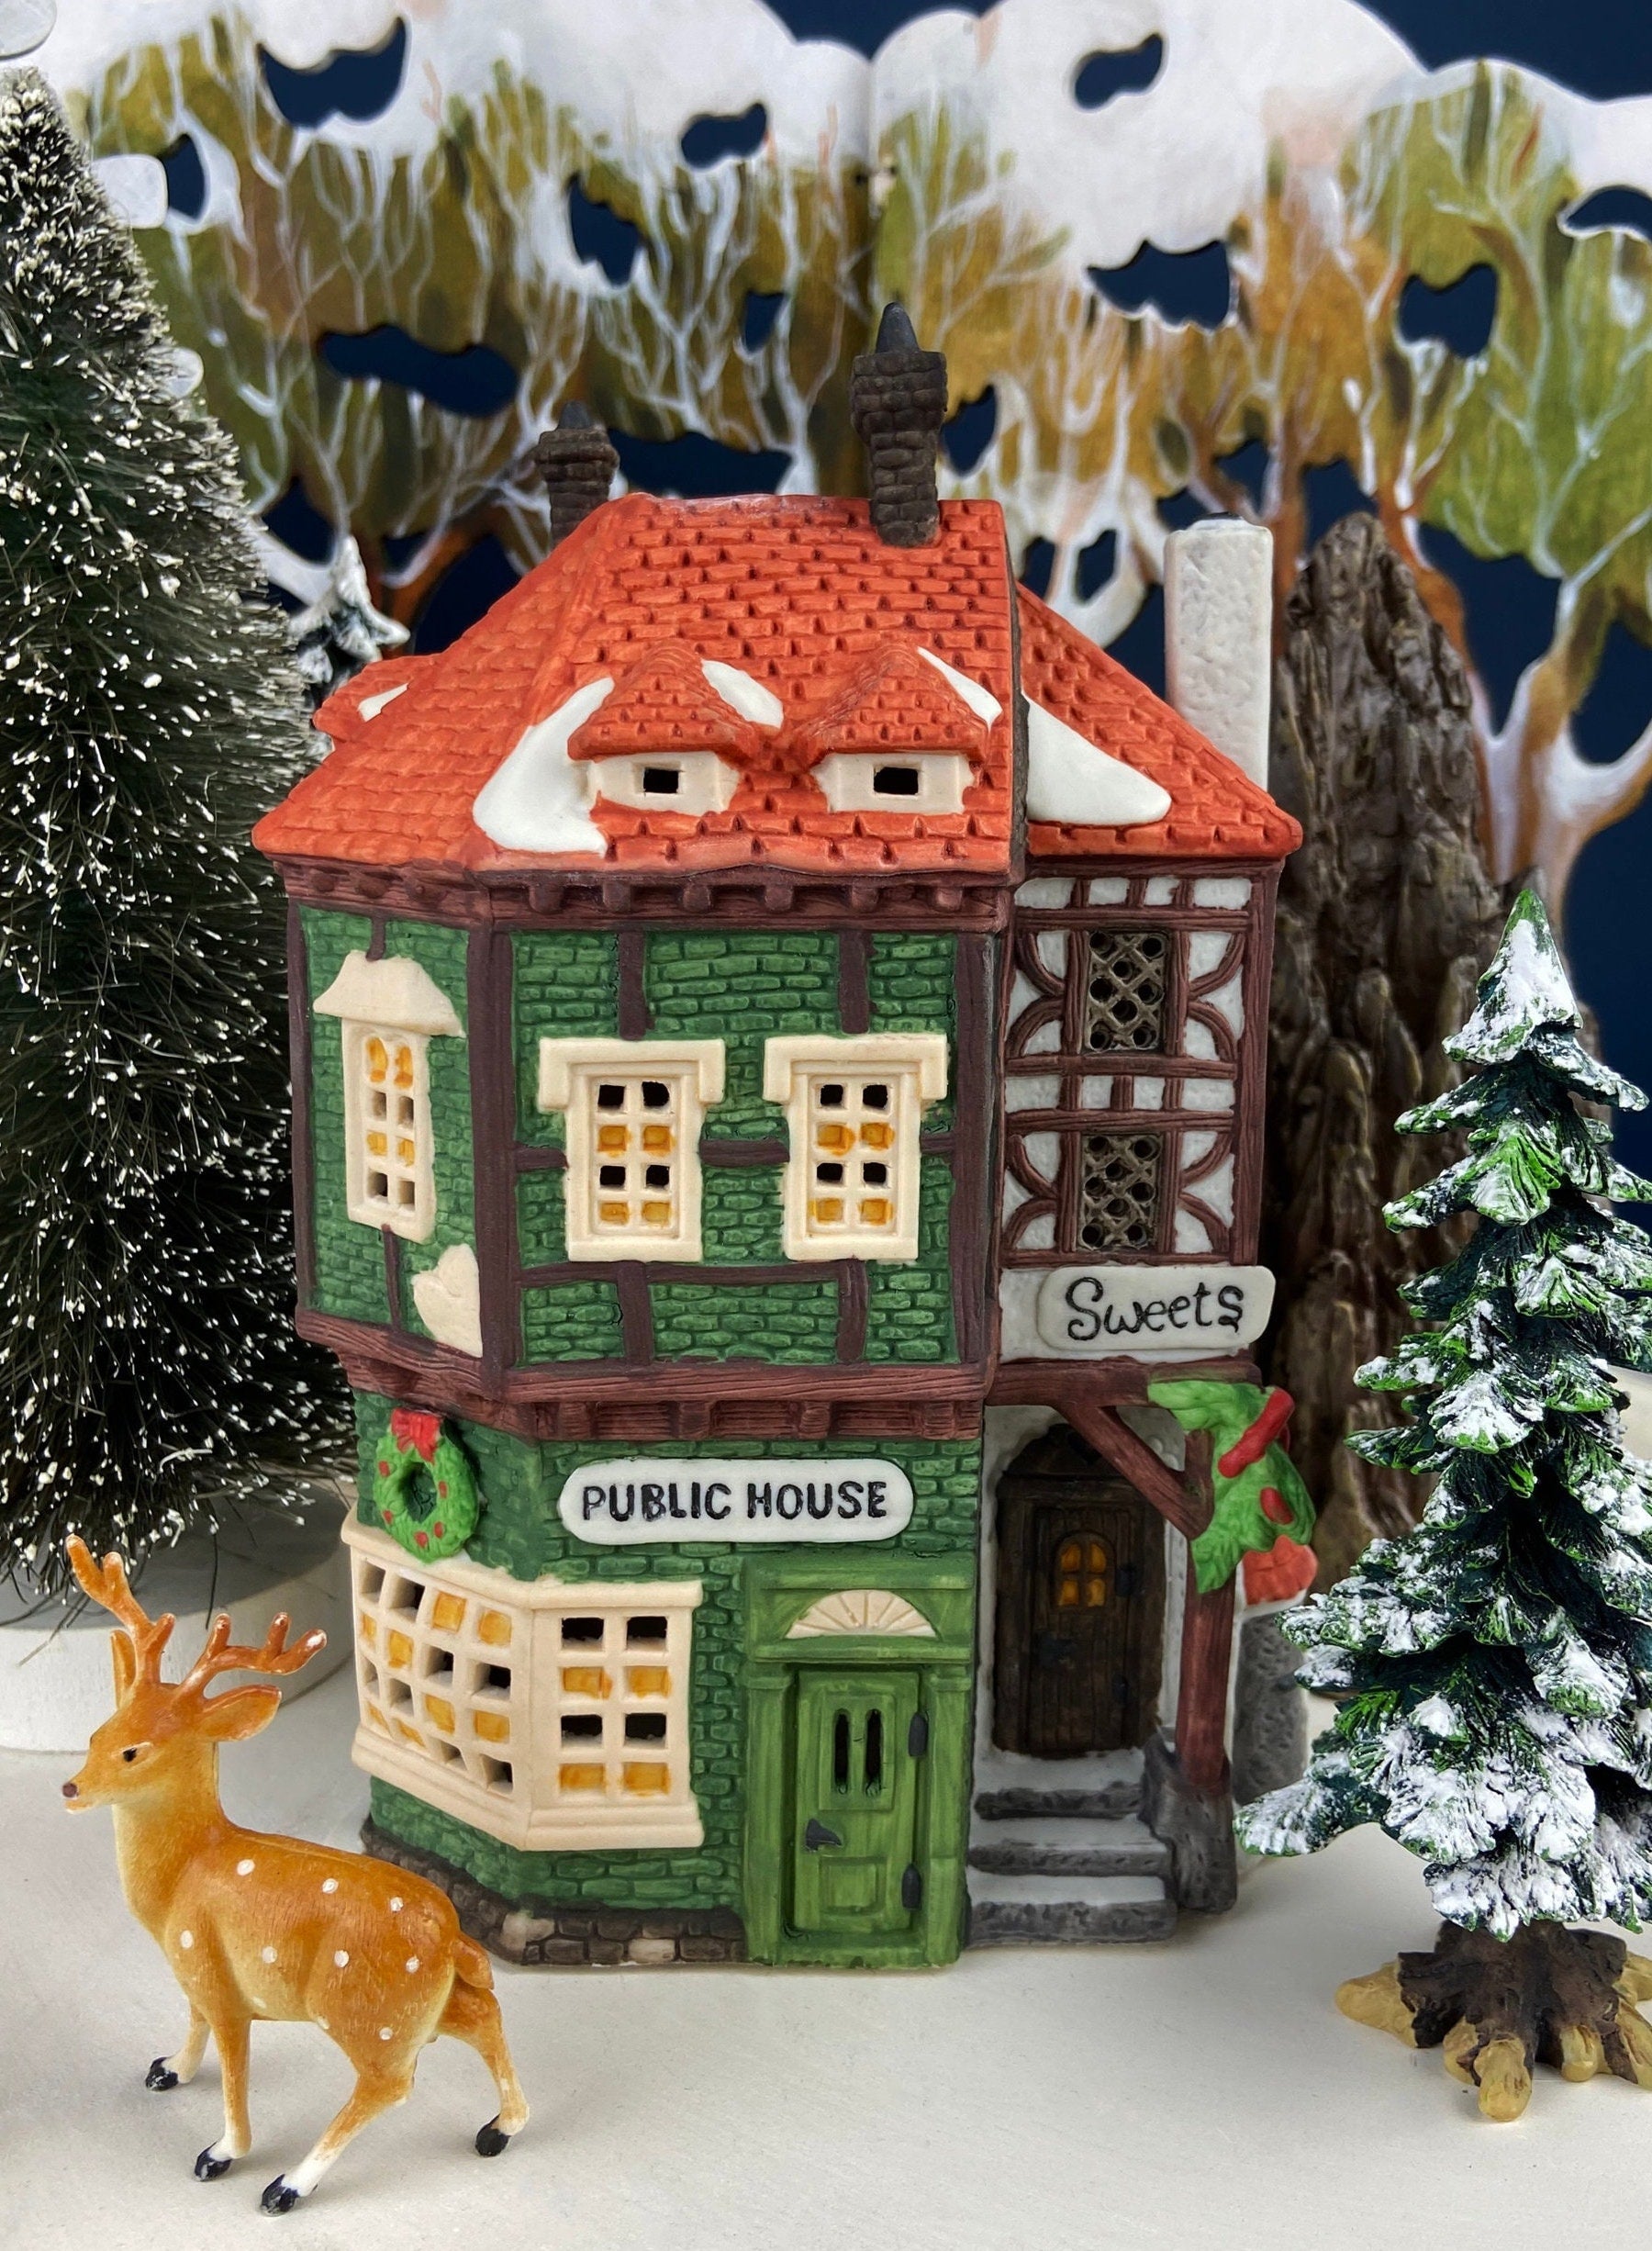 Christmas Village House by Dept 56. Illuminated Public House. Sweets.  Dickens Village Series. Made in Taiwan. Christmas Village/Diorama.